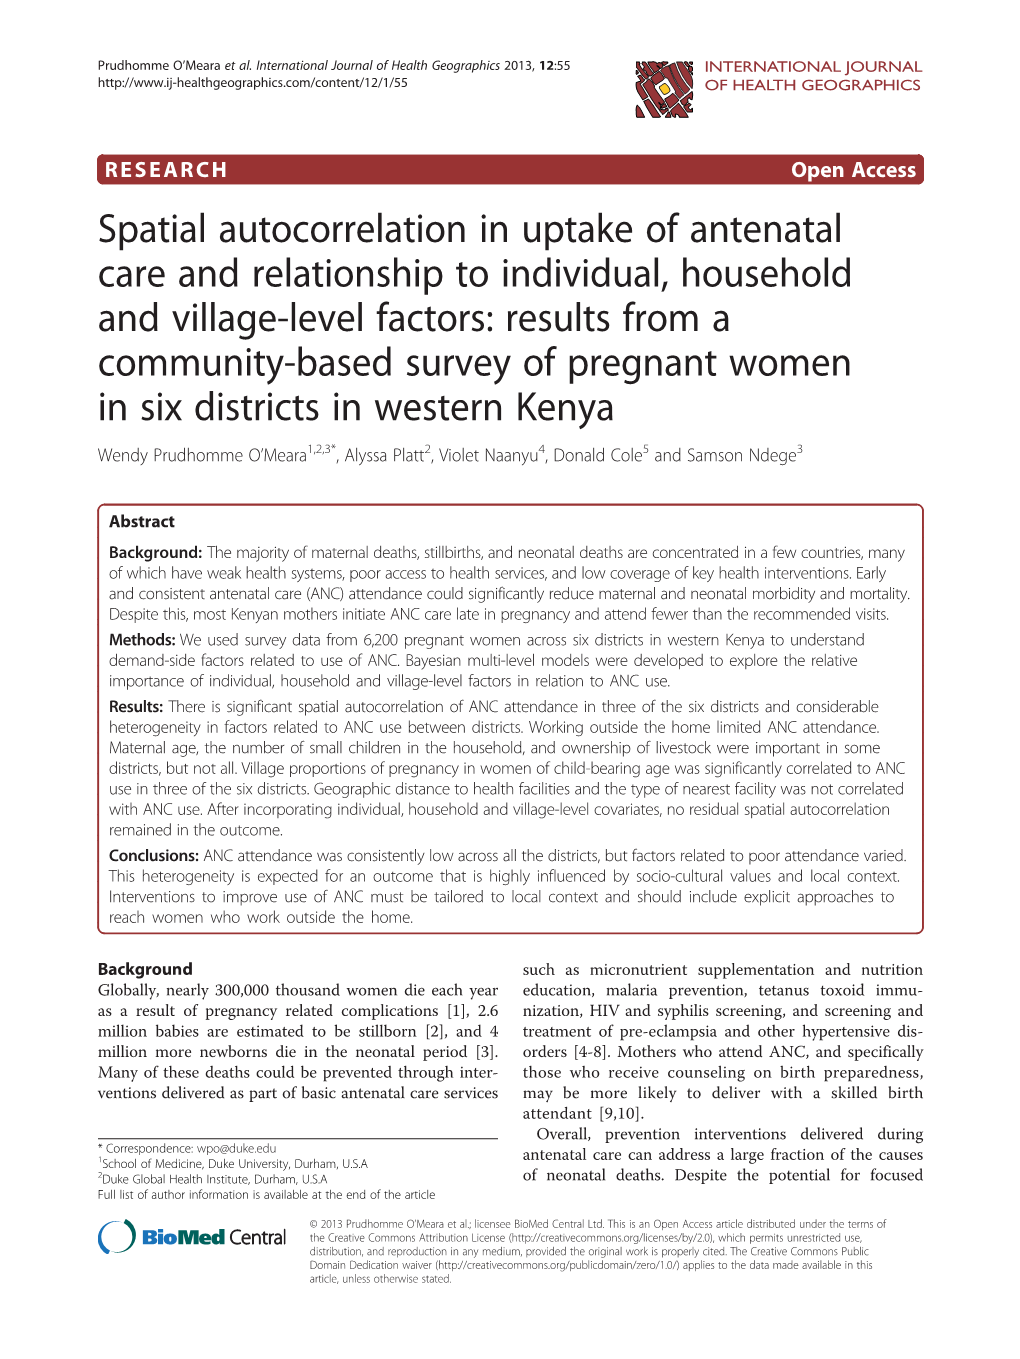 Spatial Autocorrelation in Uptake of Antenatal Care and Relationship